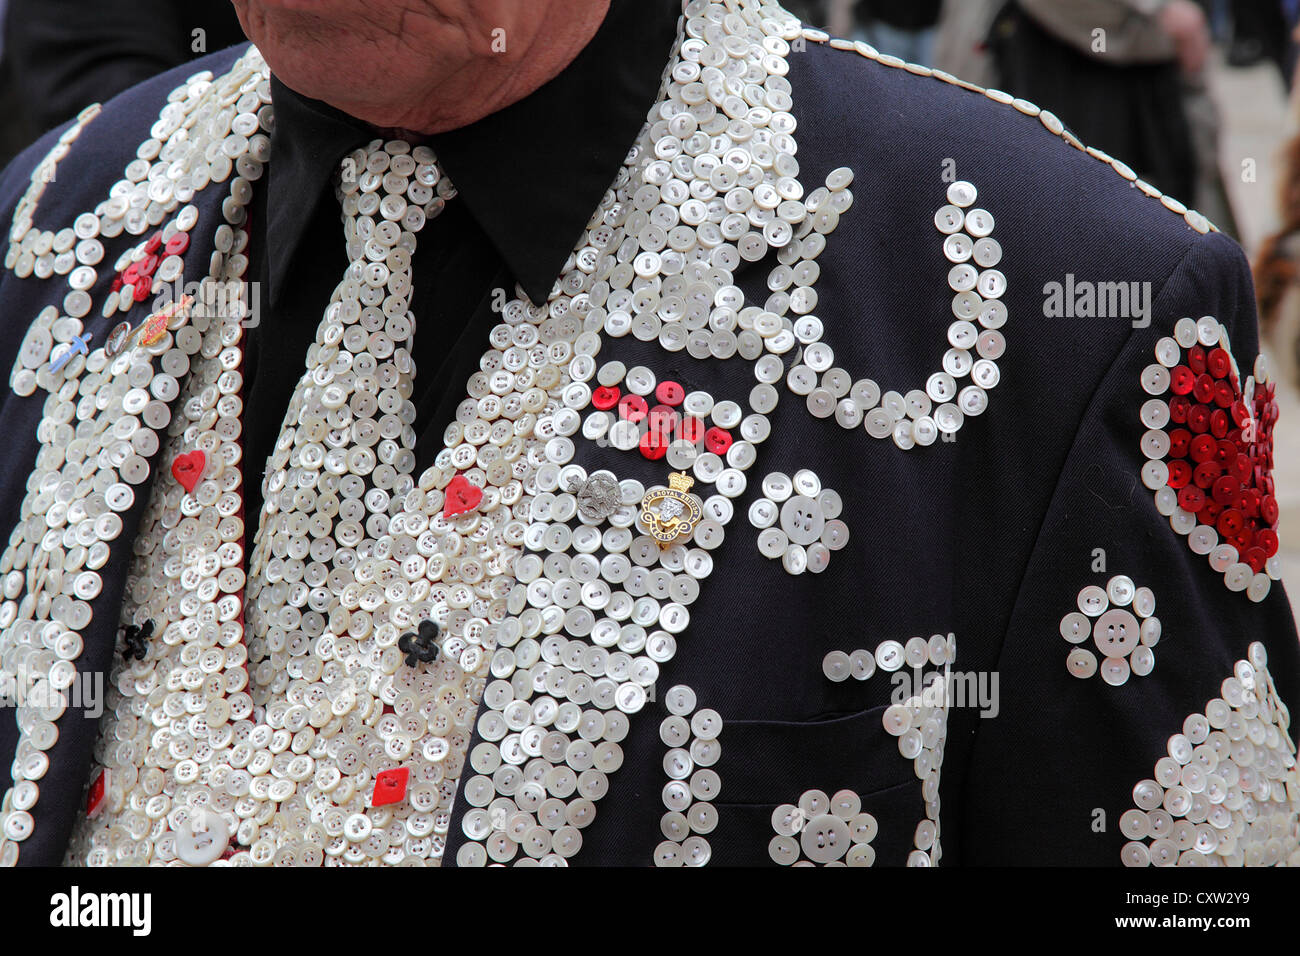 Pearly Kings and Queens at the Guildhall in London Stock Photo